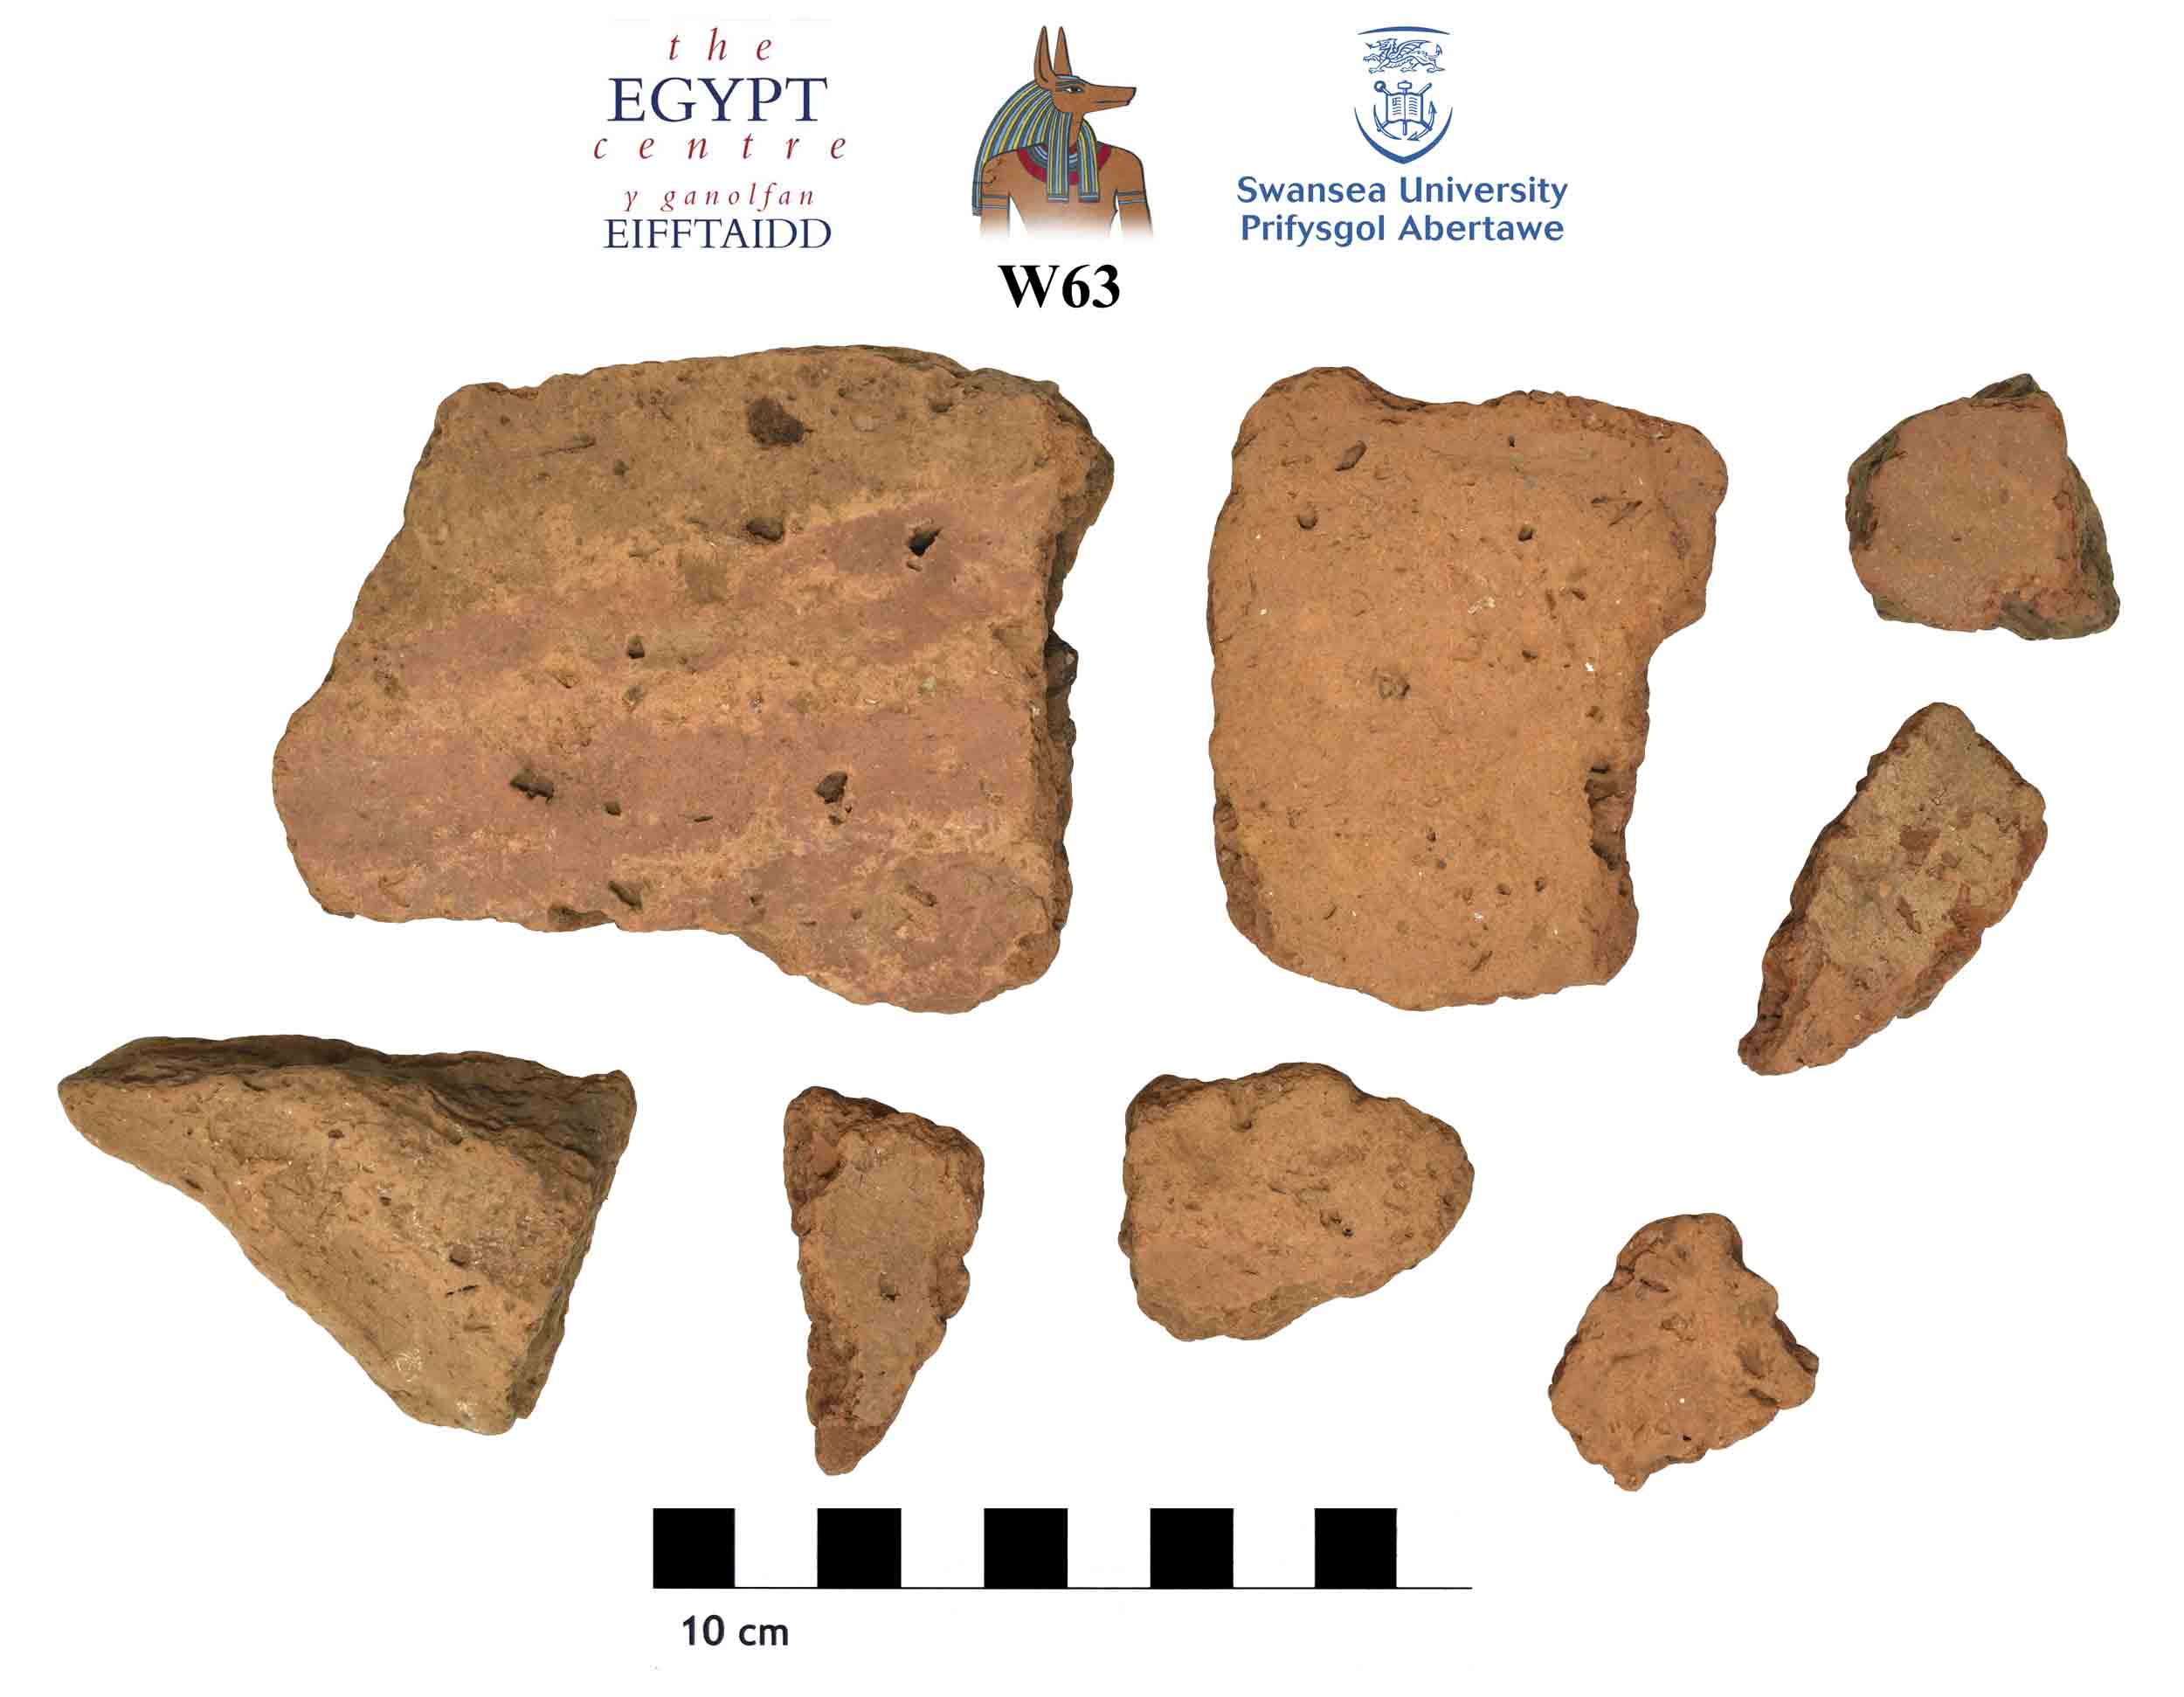 Image for: Sherds of pottery